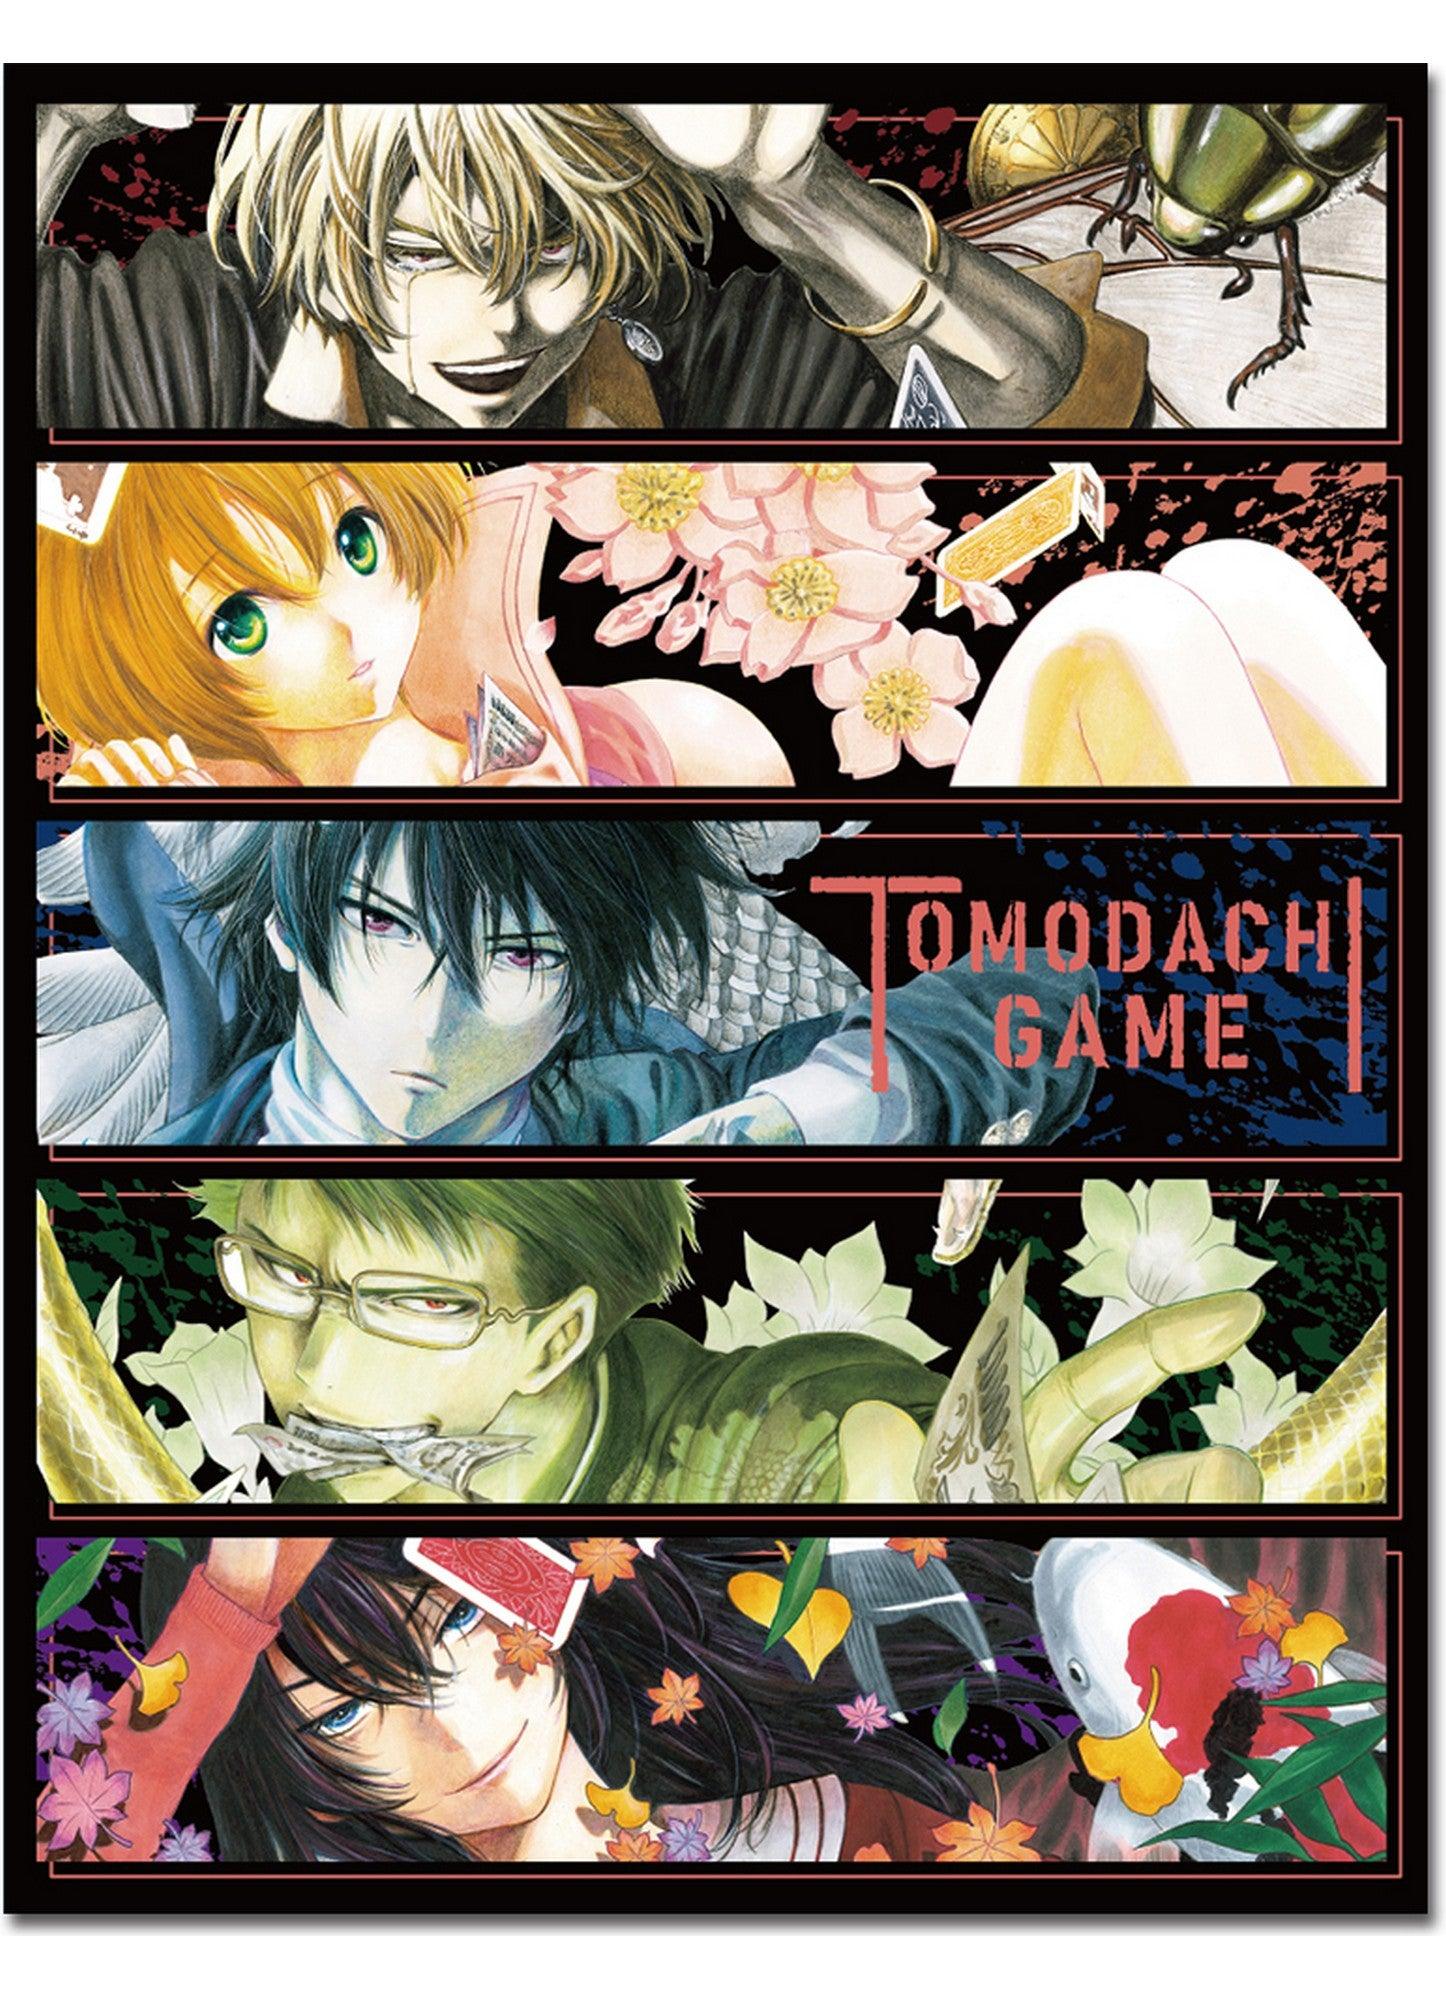 Tomodachi Game  Anime, Manga covers, Cool anime pictures